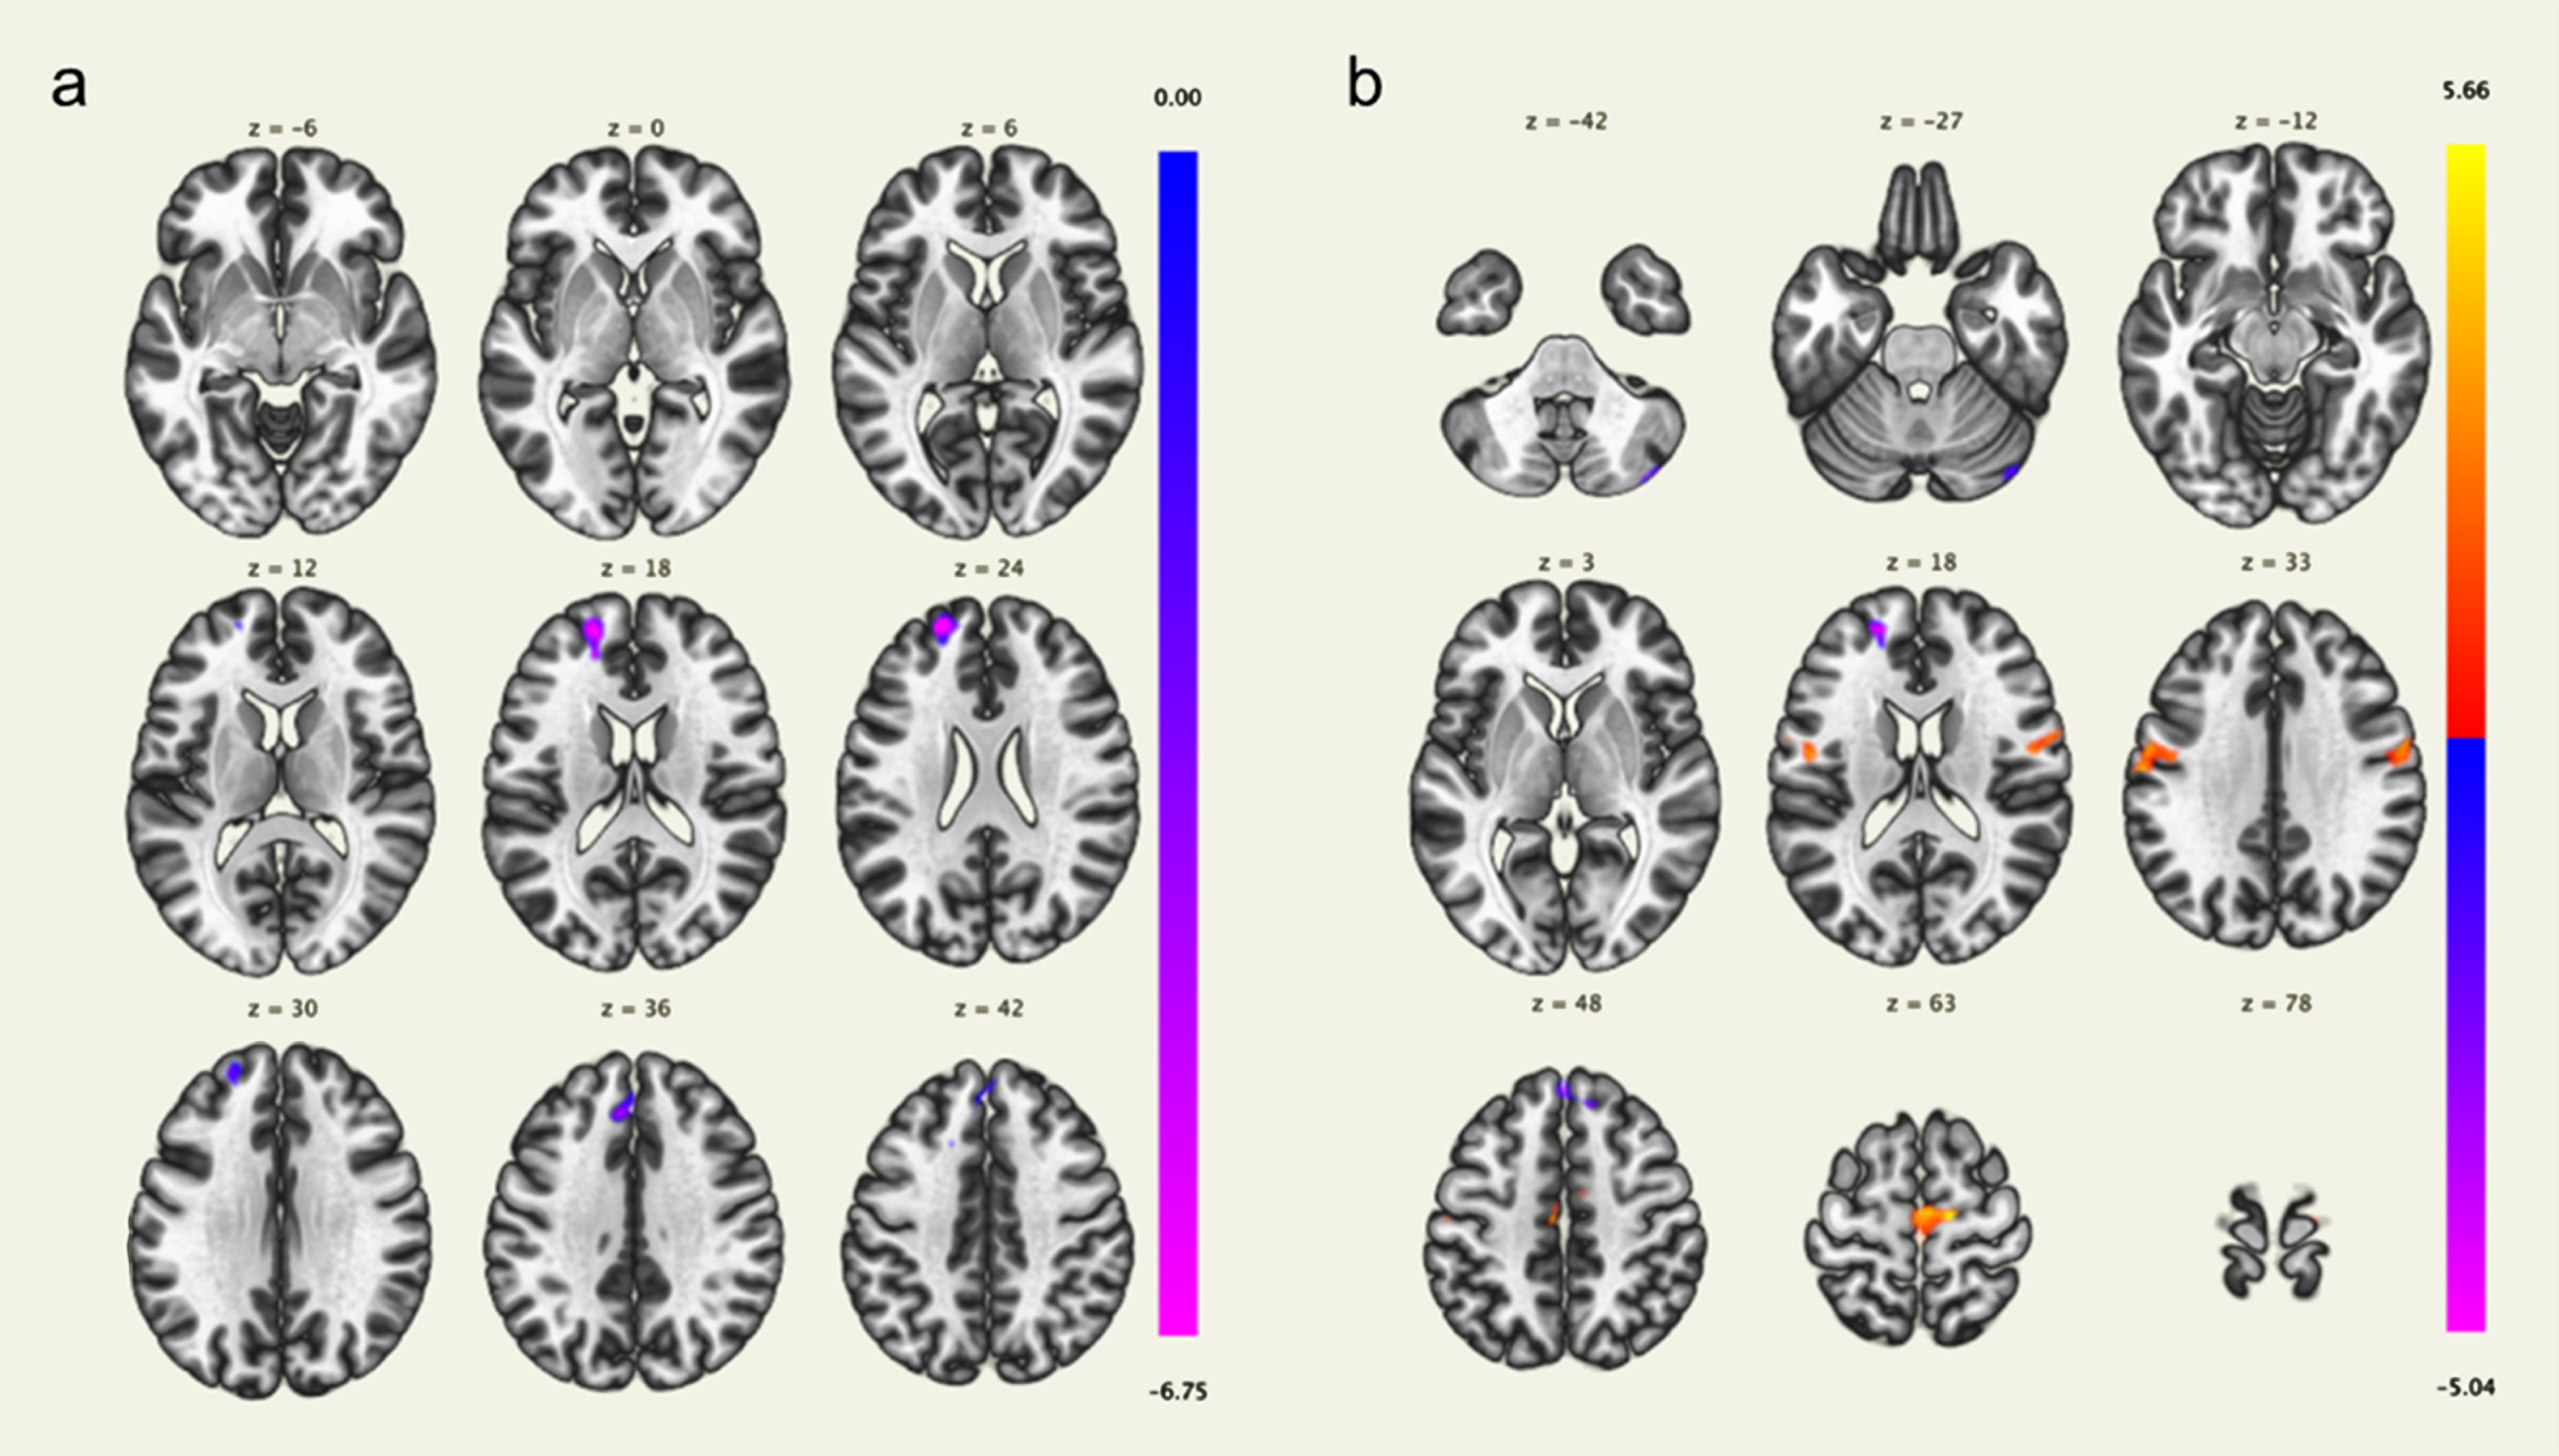 Brain regions with a significant positive correlation (red) and a significant negative correlation (blue) of voxel-based functional connectivity and the mild behavioral impairment checklist (MBI-C) affective dysregulation score (a) and impulse dyscontrol score (b). The left frontal pole and superior frontal gyrus were negatively correlated with the MBI-C affective dysregulation score (a). The bilateral precentral gyri were positively correlated with the MBI-C impulse dyscontrol score, and the left superior frontal gyrus, left frontal pole, and right cerebellum were negatively correlated with the MBI-C impulse dyscontrol score (b).